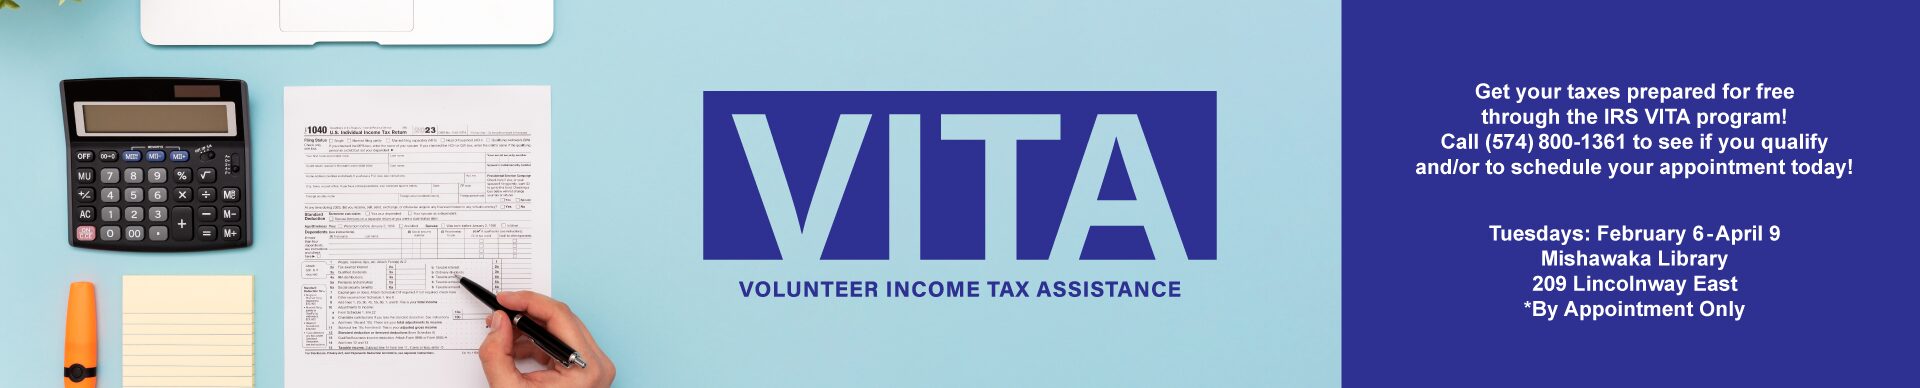 Computer, calculator, notepad a person’s hand holding a pen and a 2023 1040 tax form. Goodwill logo. Text image, ‘VITA VOLUNTEER INCOME TAX ASSISTANCE Get your taxes prepared for free through the IRS VITA program! Call (574) 800-1361 to see if you qualify and/or to schedule your appointment today! Tuesdays: February 6 - April 9 Mishawaka Library 209 Lincolnway East *By Appointment Only’